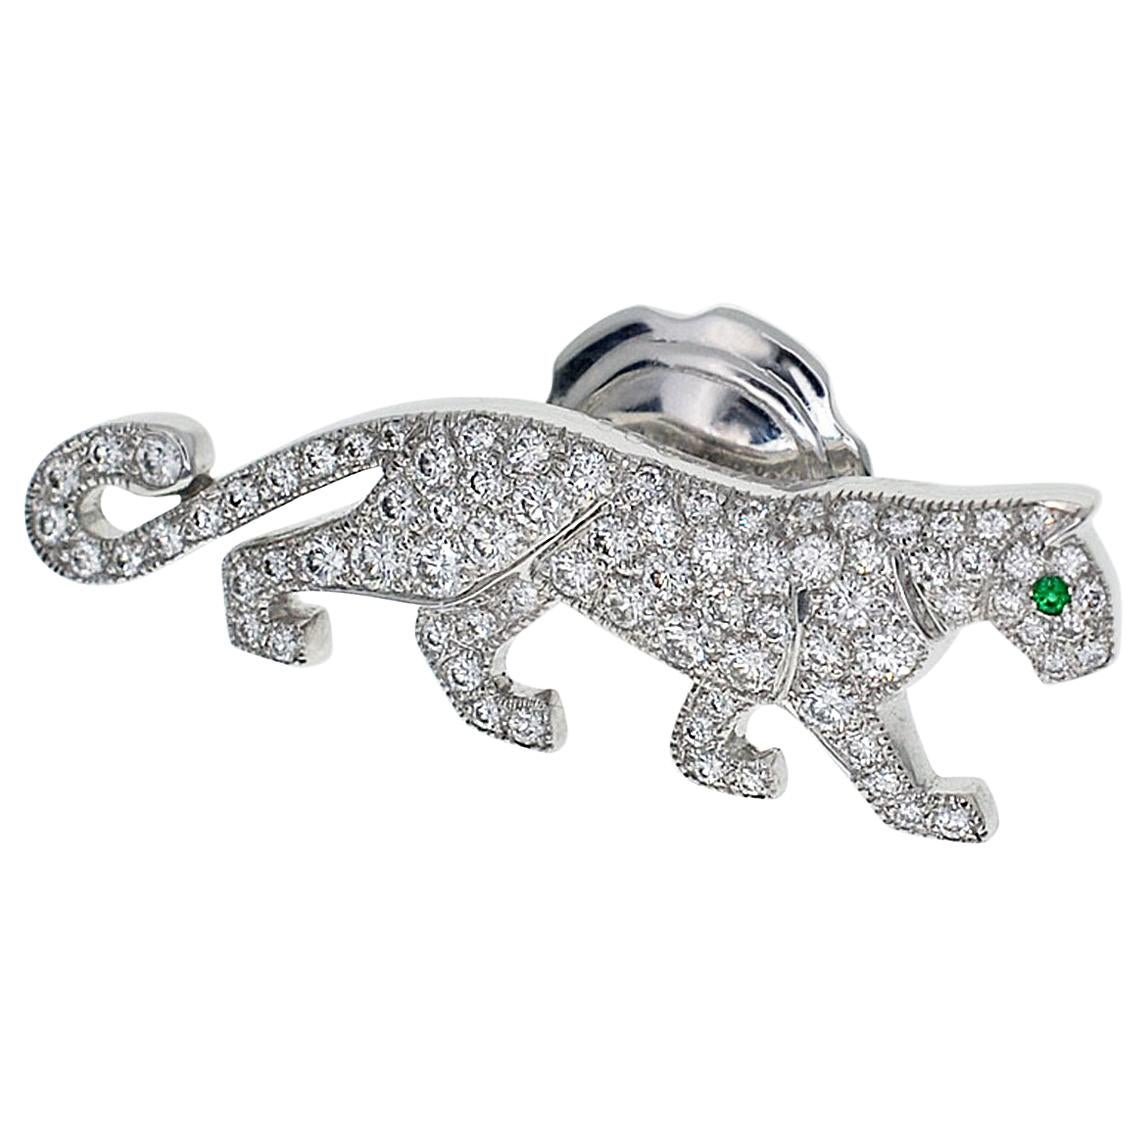 Brand:Cartier
Name:Panther diamond Pin brooch
Material :Diamond, emerald, 750 K18 WG White Gold
Comes with:Cartier Case,Certificate
Size(inch):W11mm×H34mm/0.43